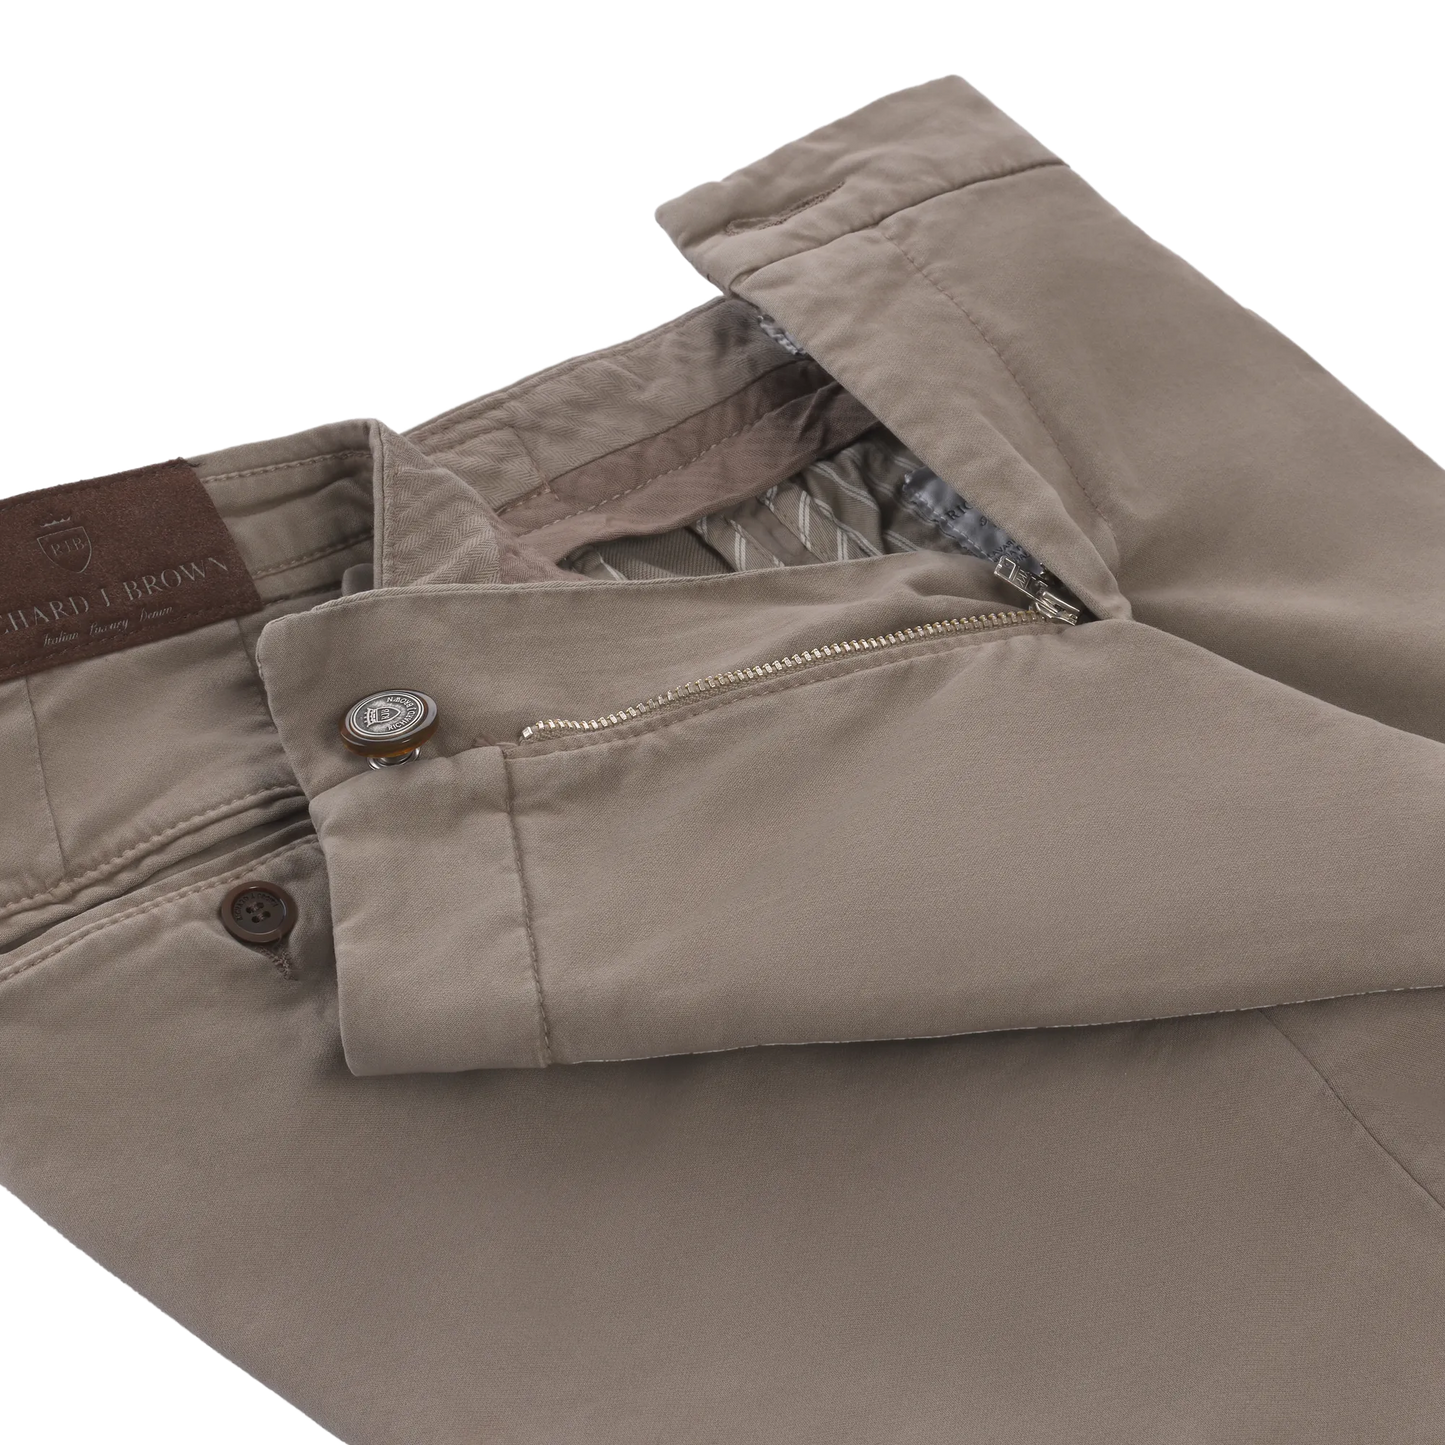 Slim-Fit Stretch-Cotton Trousers with Buckle Adjusters in Taupe